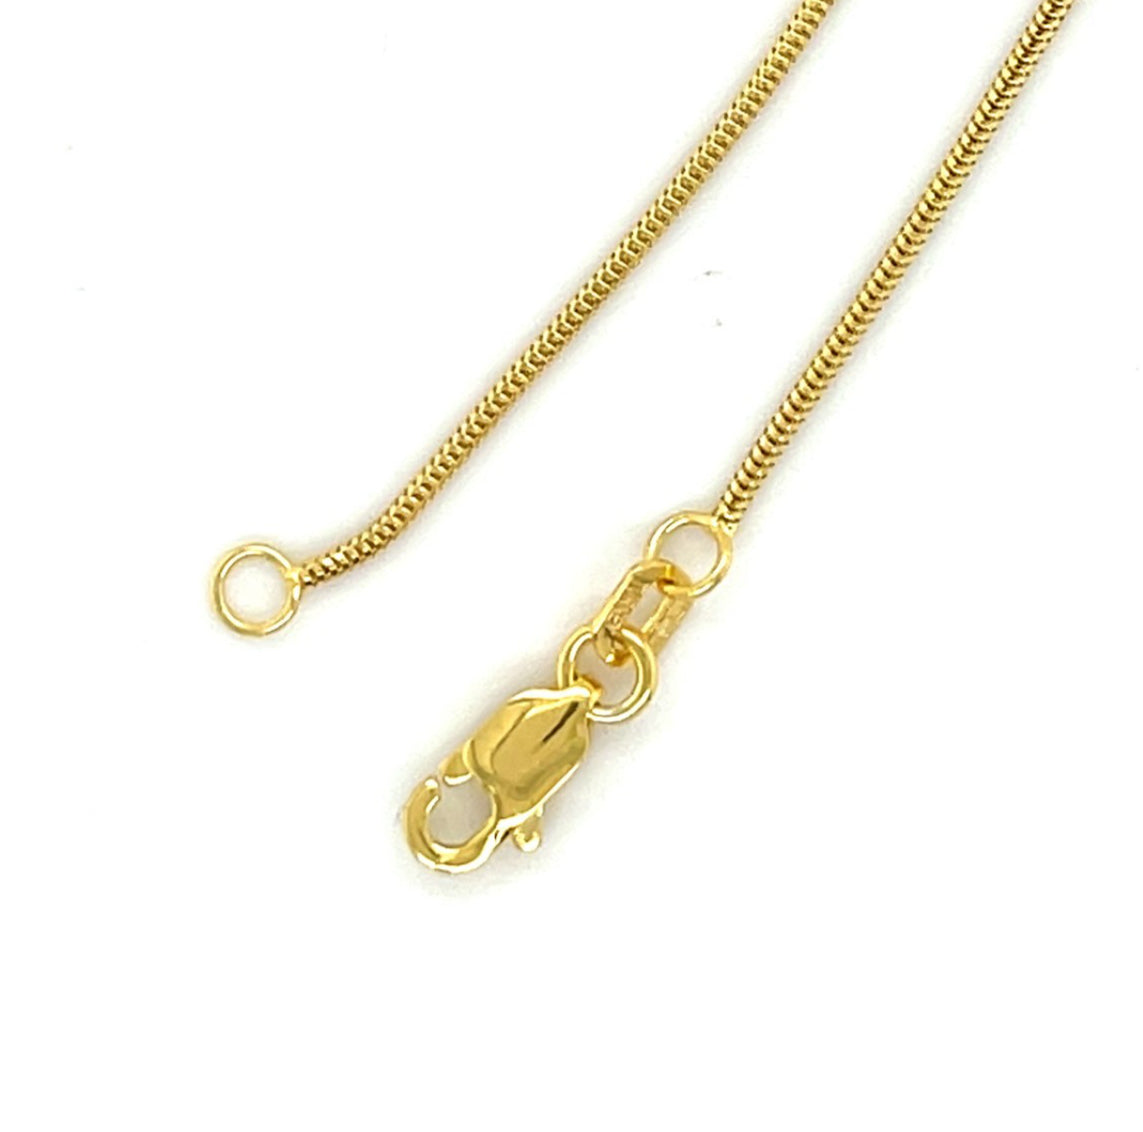 Real 14K Gold Snake Necklace Chain